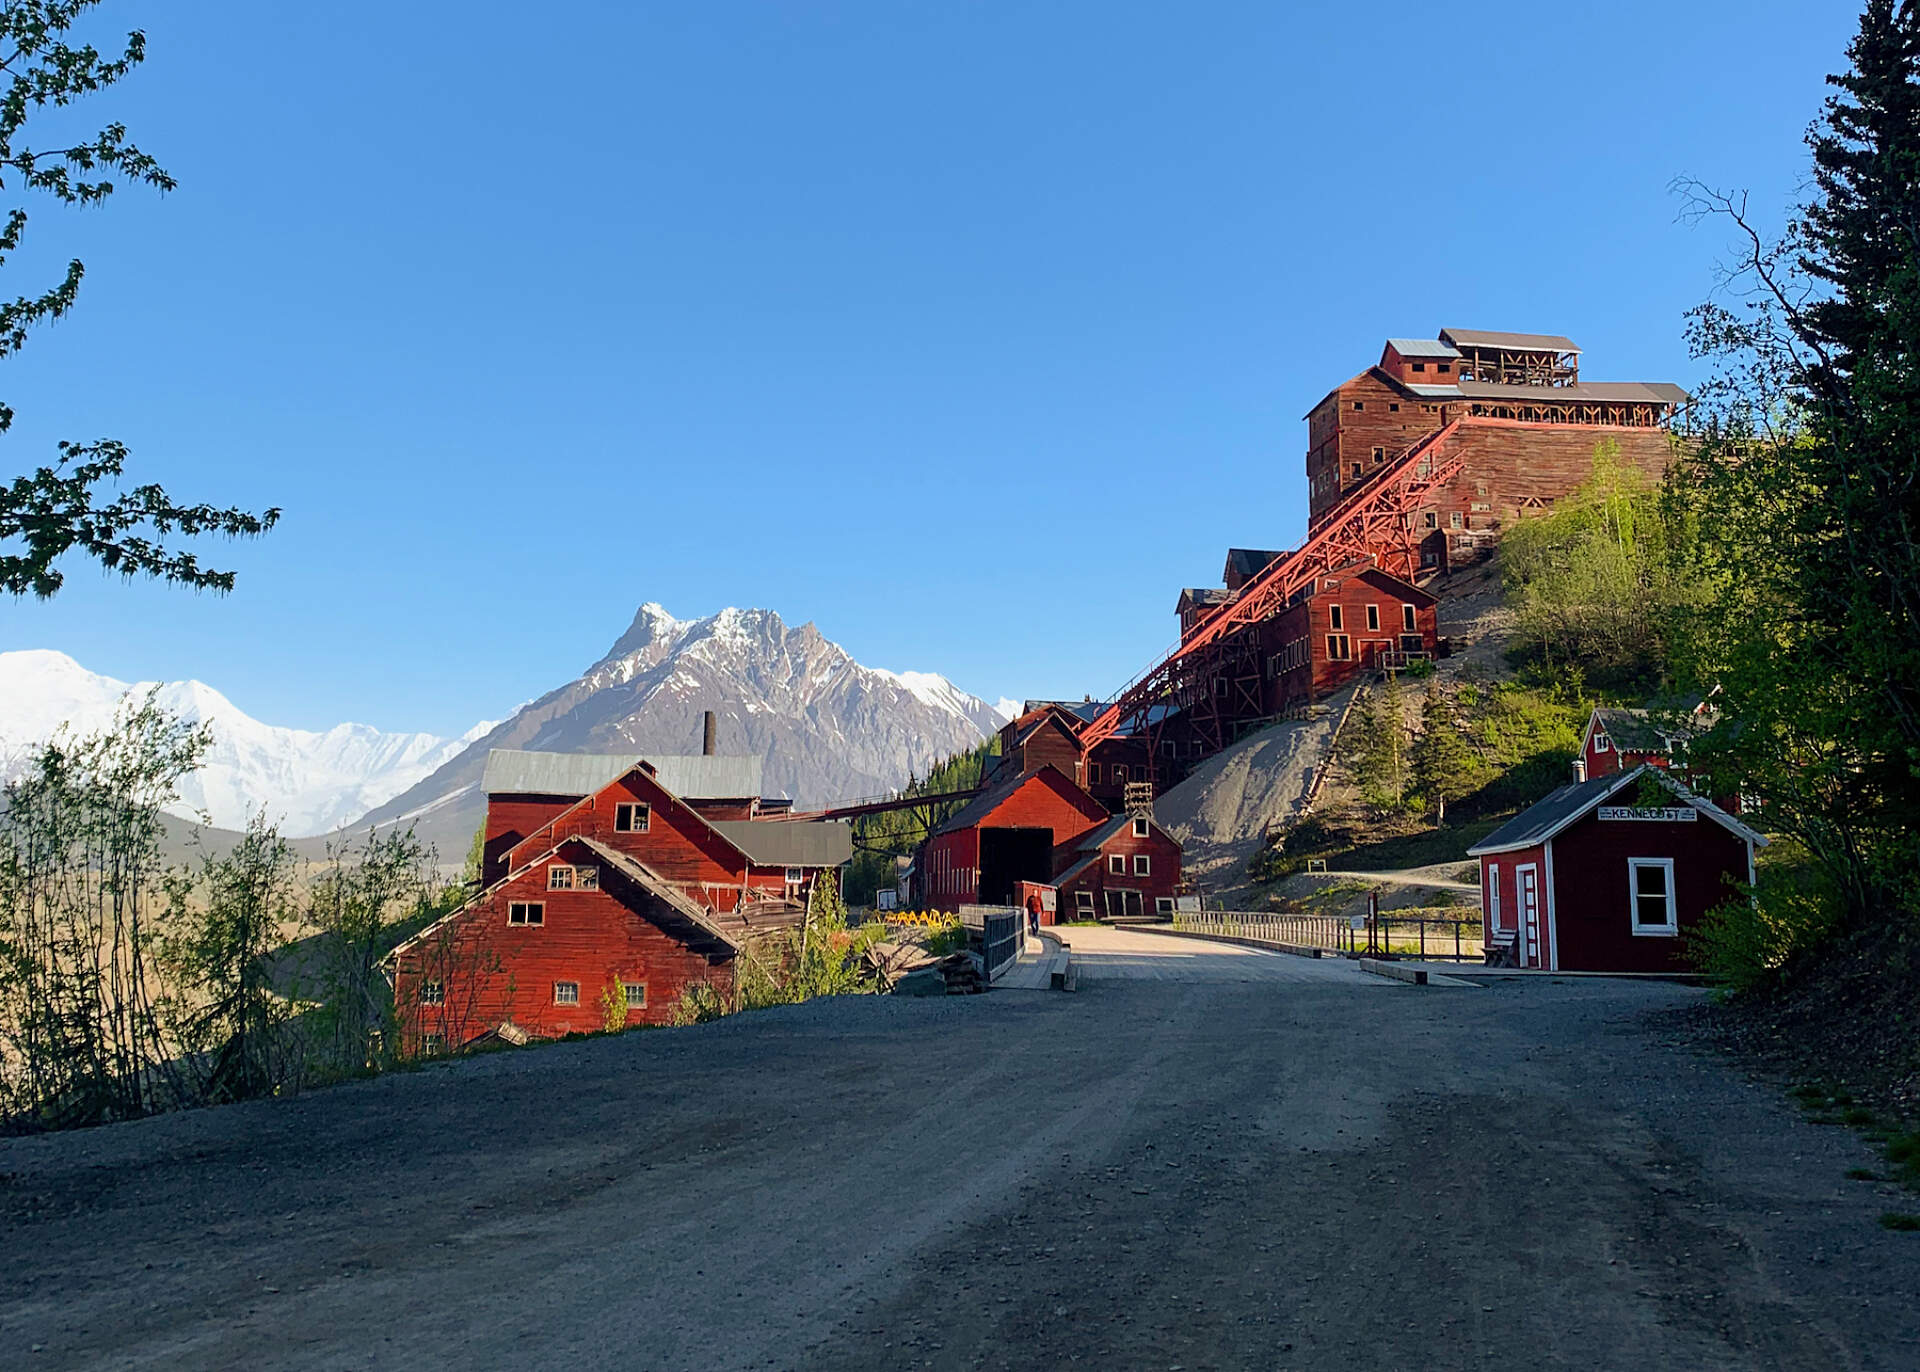 View of the historic Kennecott Mine